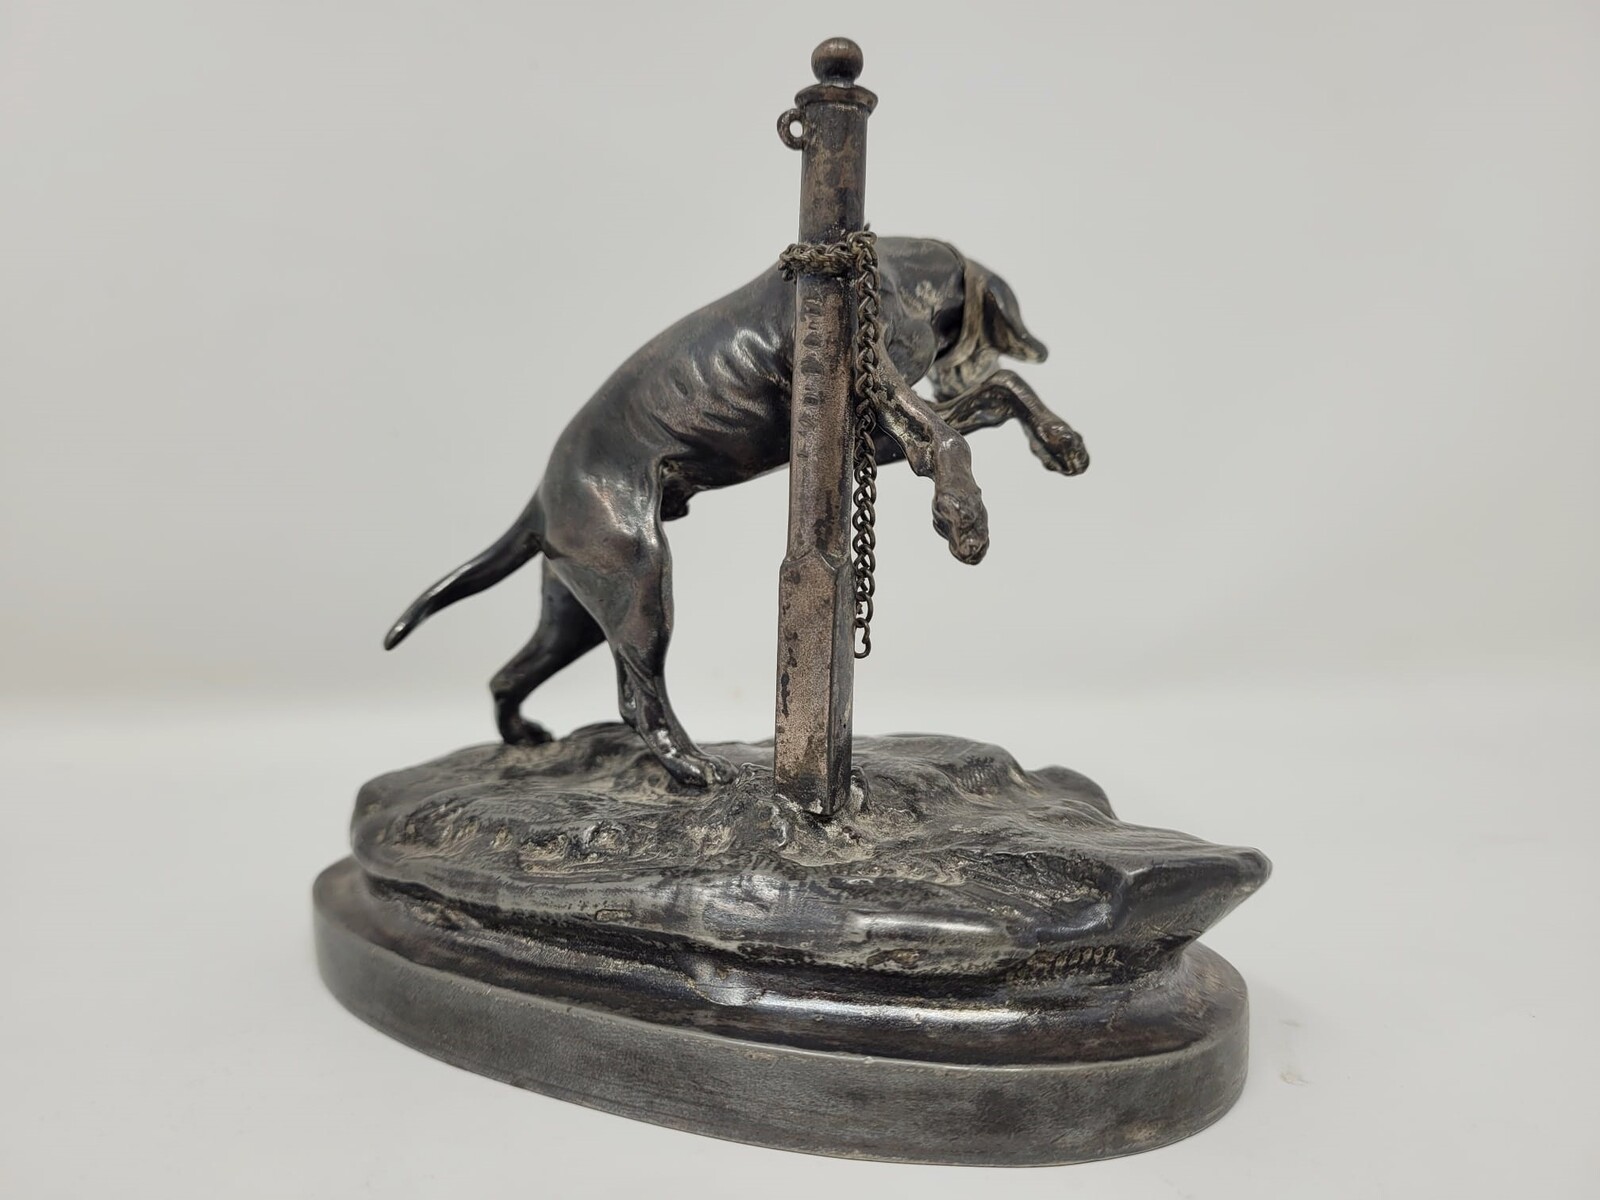 Silver metal sculpture representing a tethered dog